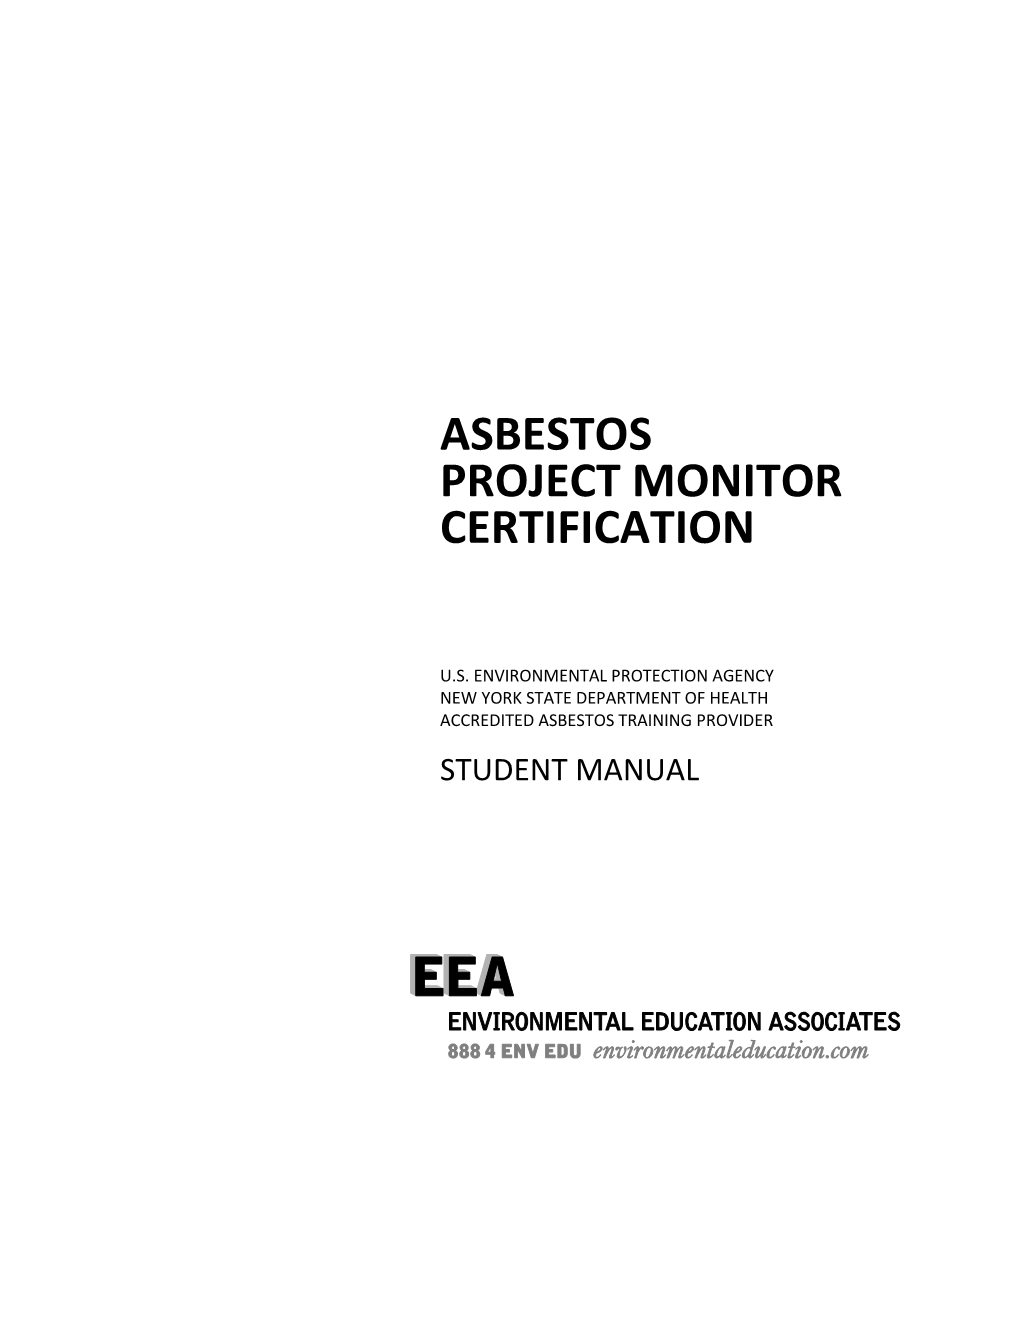 Asbestos Project Monitor Certification